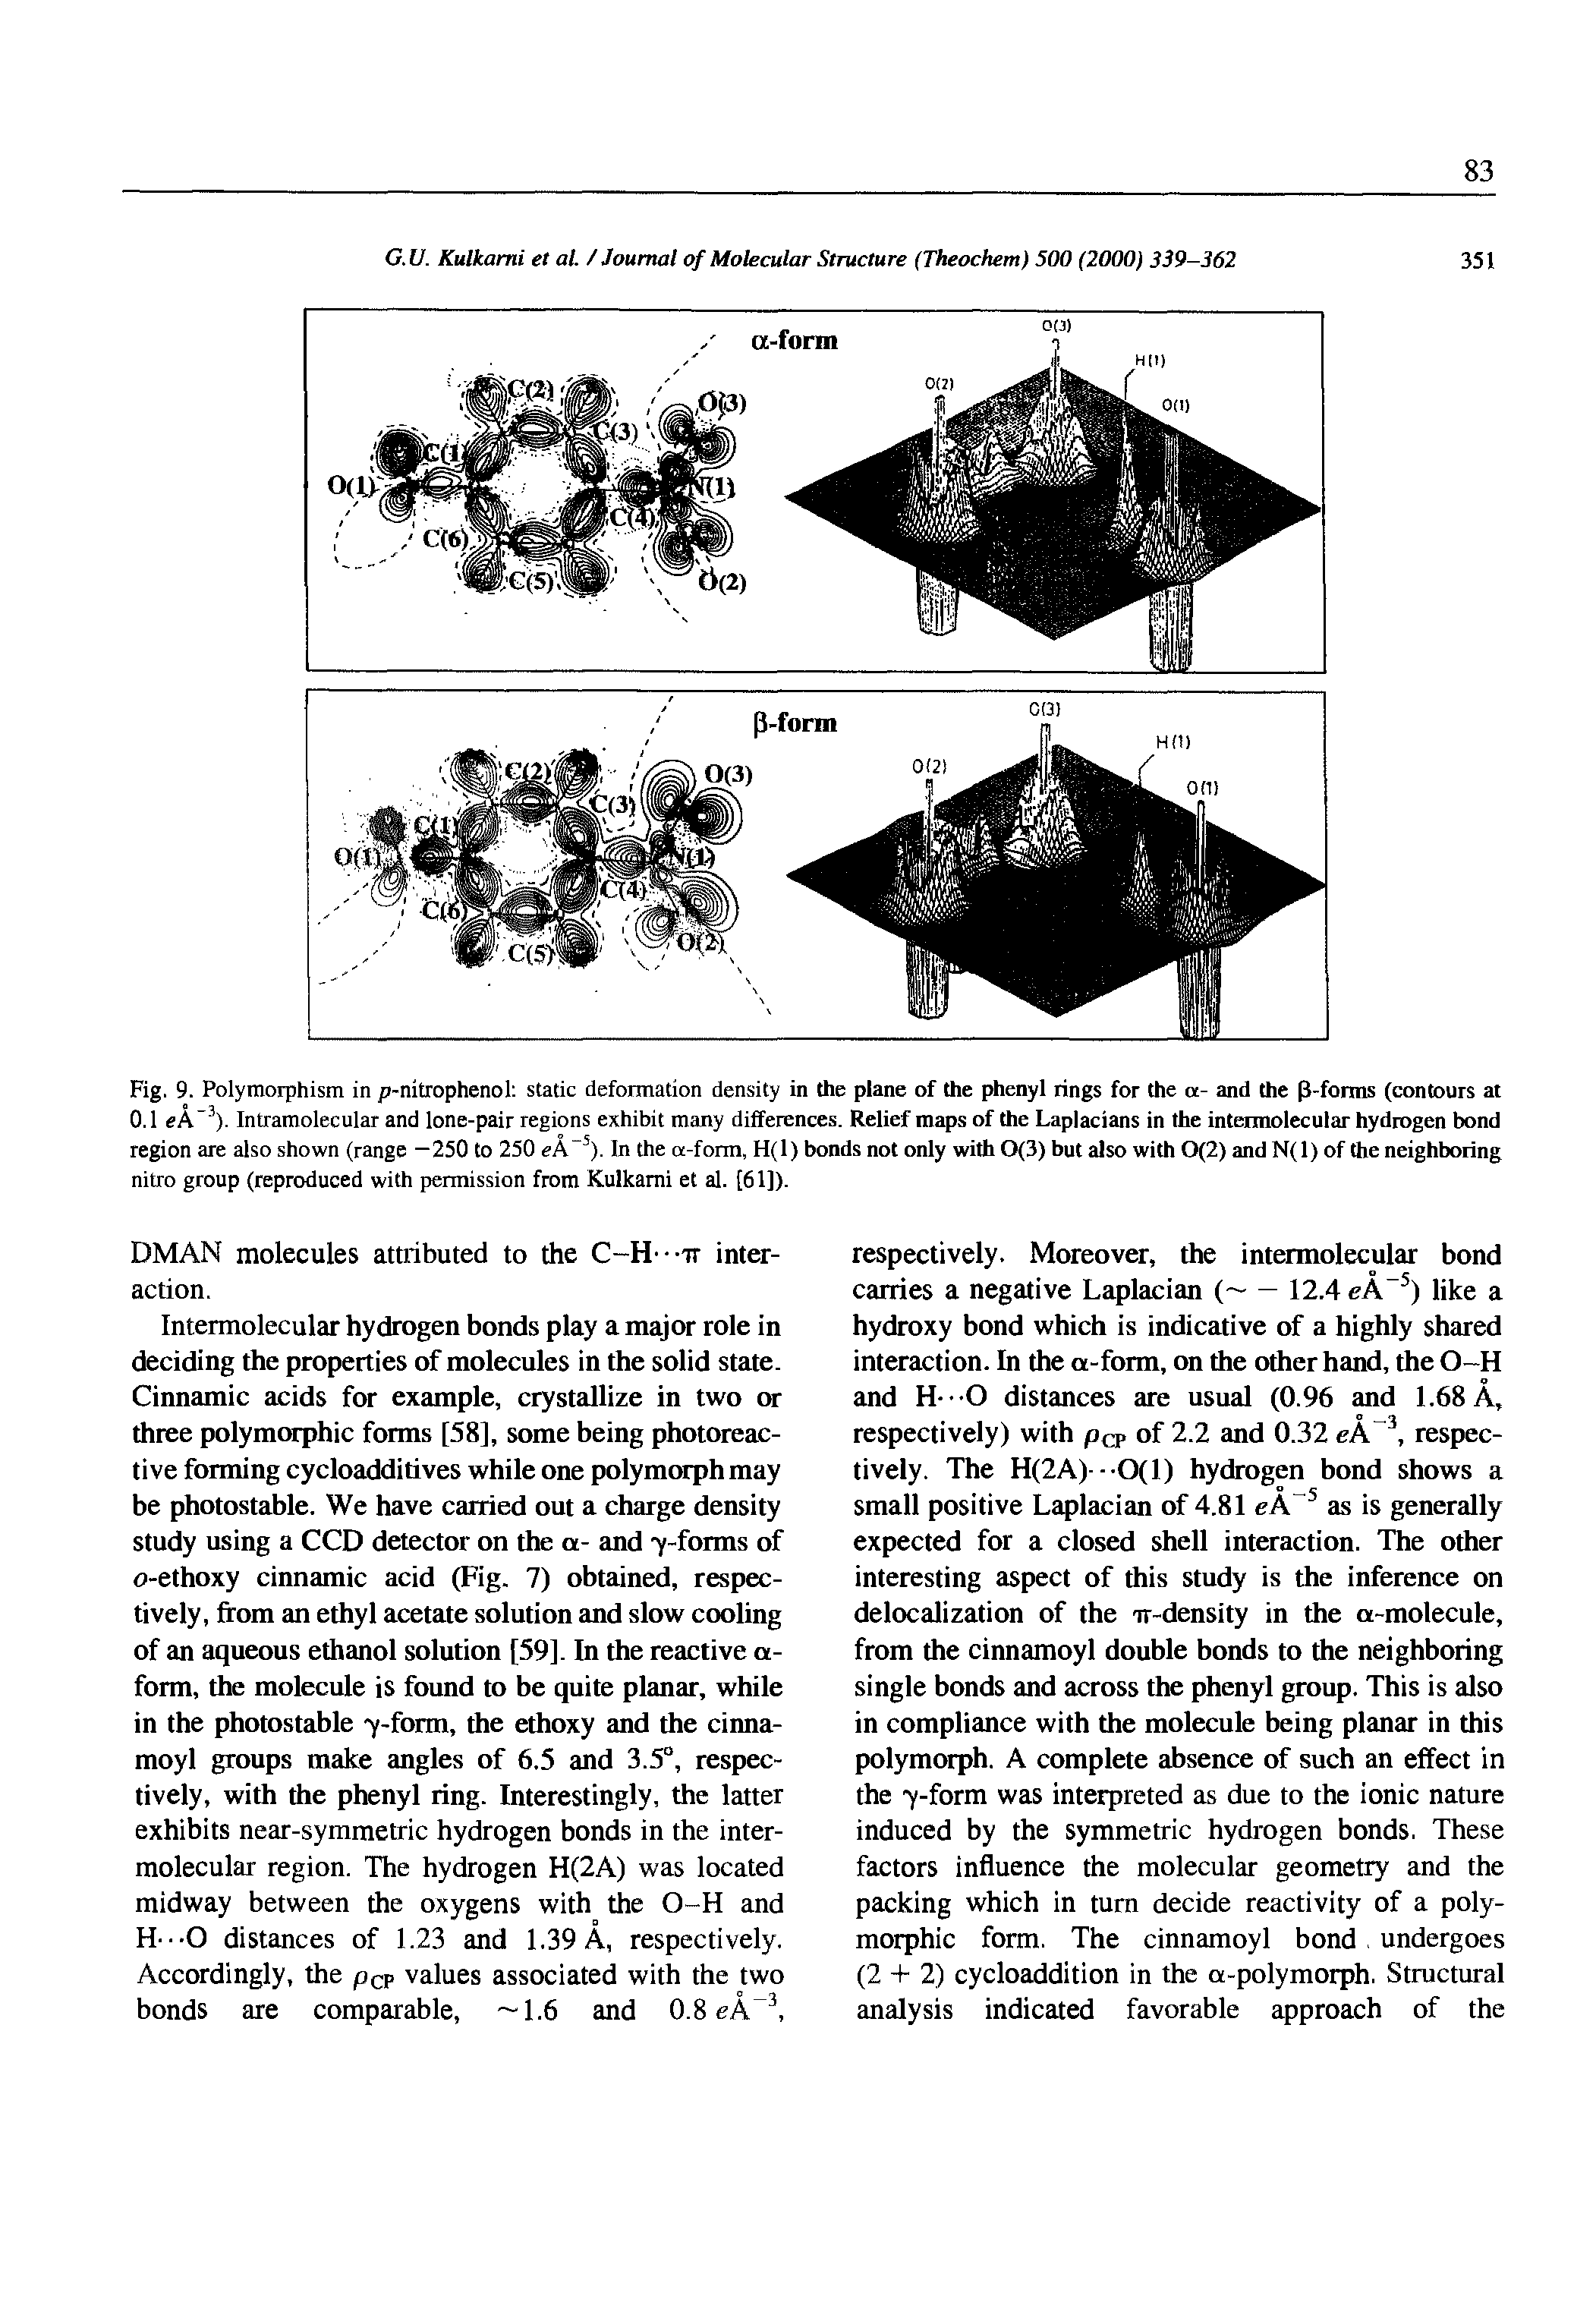 Fig. 9. Polymorphism in p-nitrophenol static deformation density in the plane of the phenyl rings for the a- and the (3-forms (contours at 0.1 eA-3). Intramolecular and lone-pair regions exhibit many differences. Relief maps of the Laplacians in the inteimolecular hydrogen bond region are also shown (range -250 to 250 eA-5). In the a-fonn, H(l) bonds not only with 0(3) but also with 0(2) and N(l) of the neighboring nitro group (reproduced with permission from Kulkami et al. [61]).